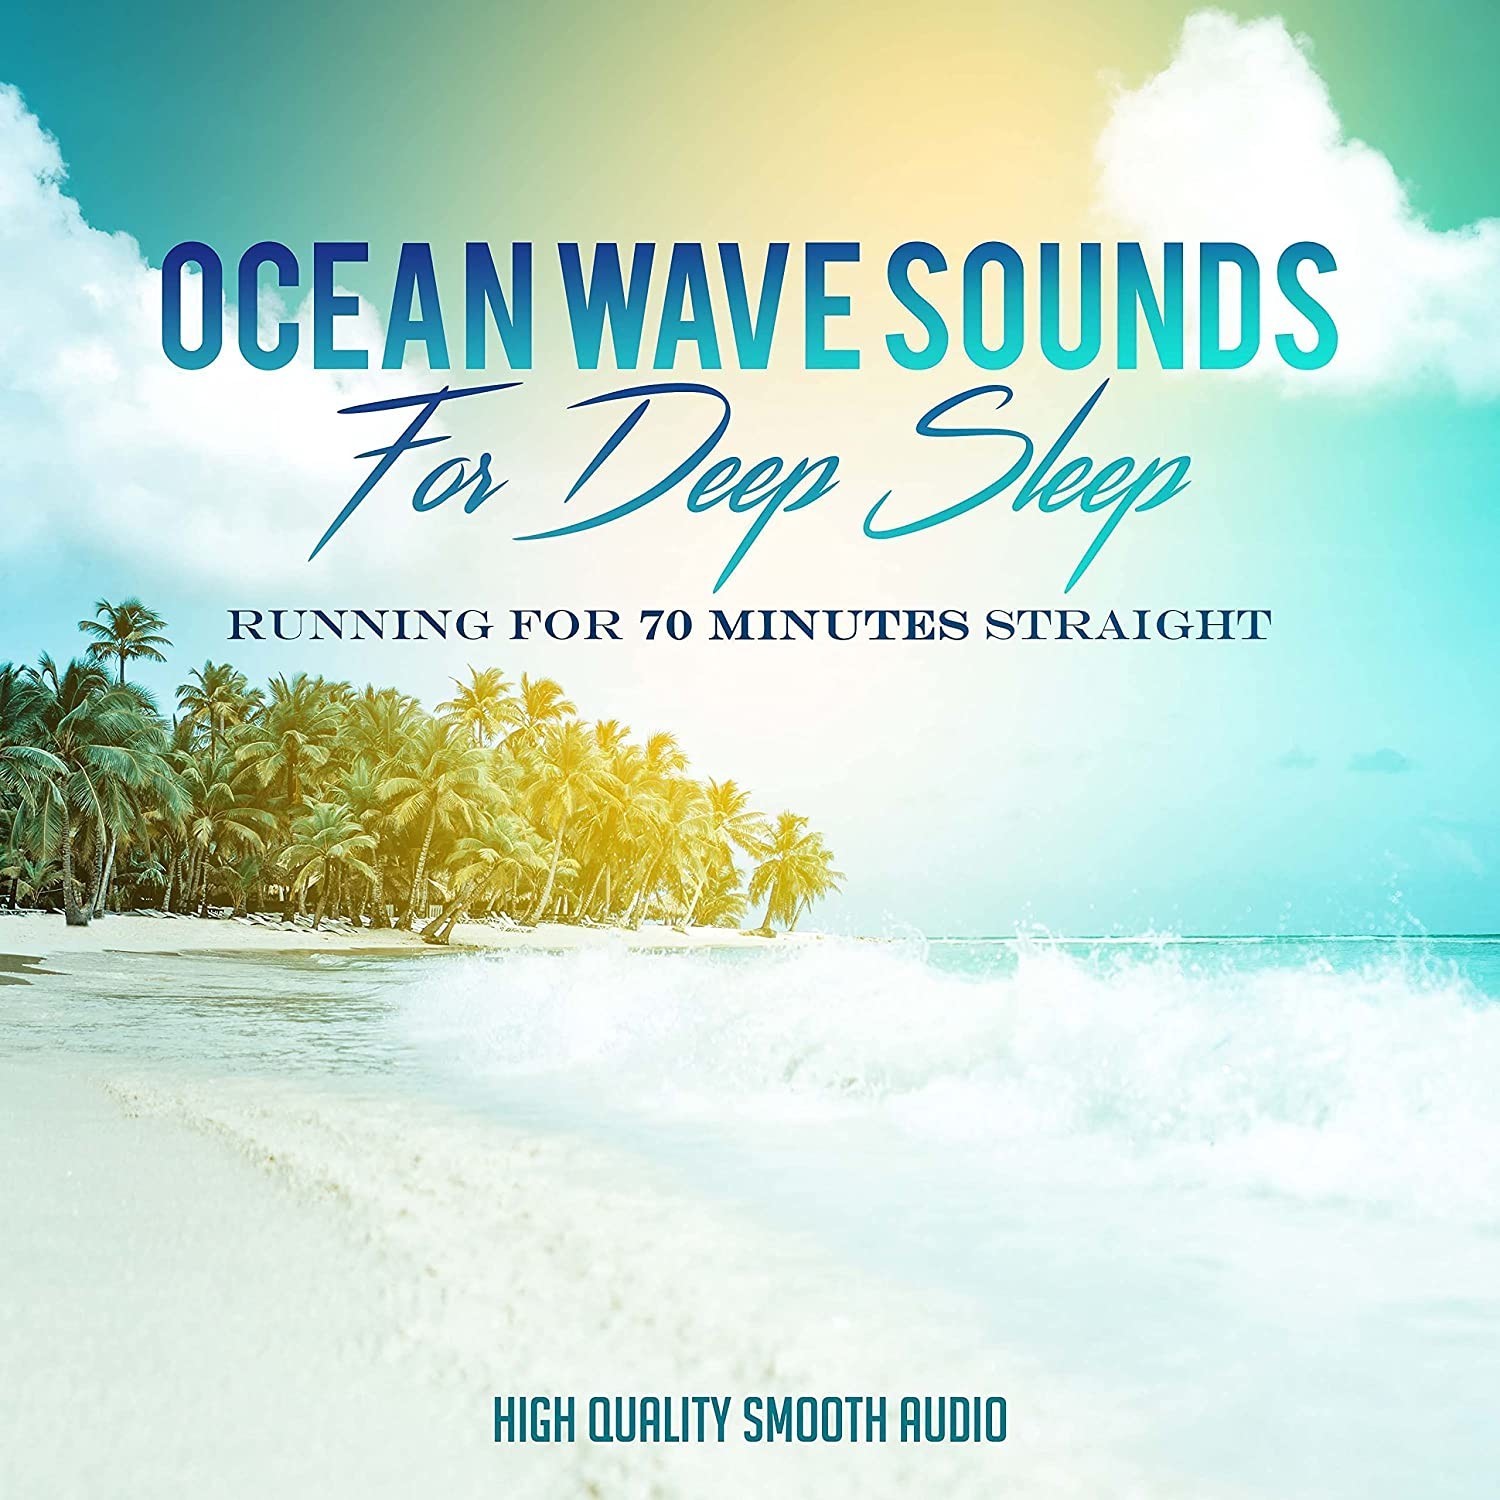 40% Off on Sleeping Music, Ocean Nature Sounds CD | 70 Minutes Run Time | High Quality Audio